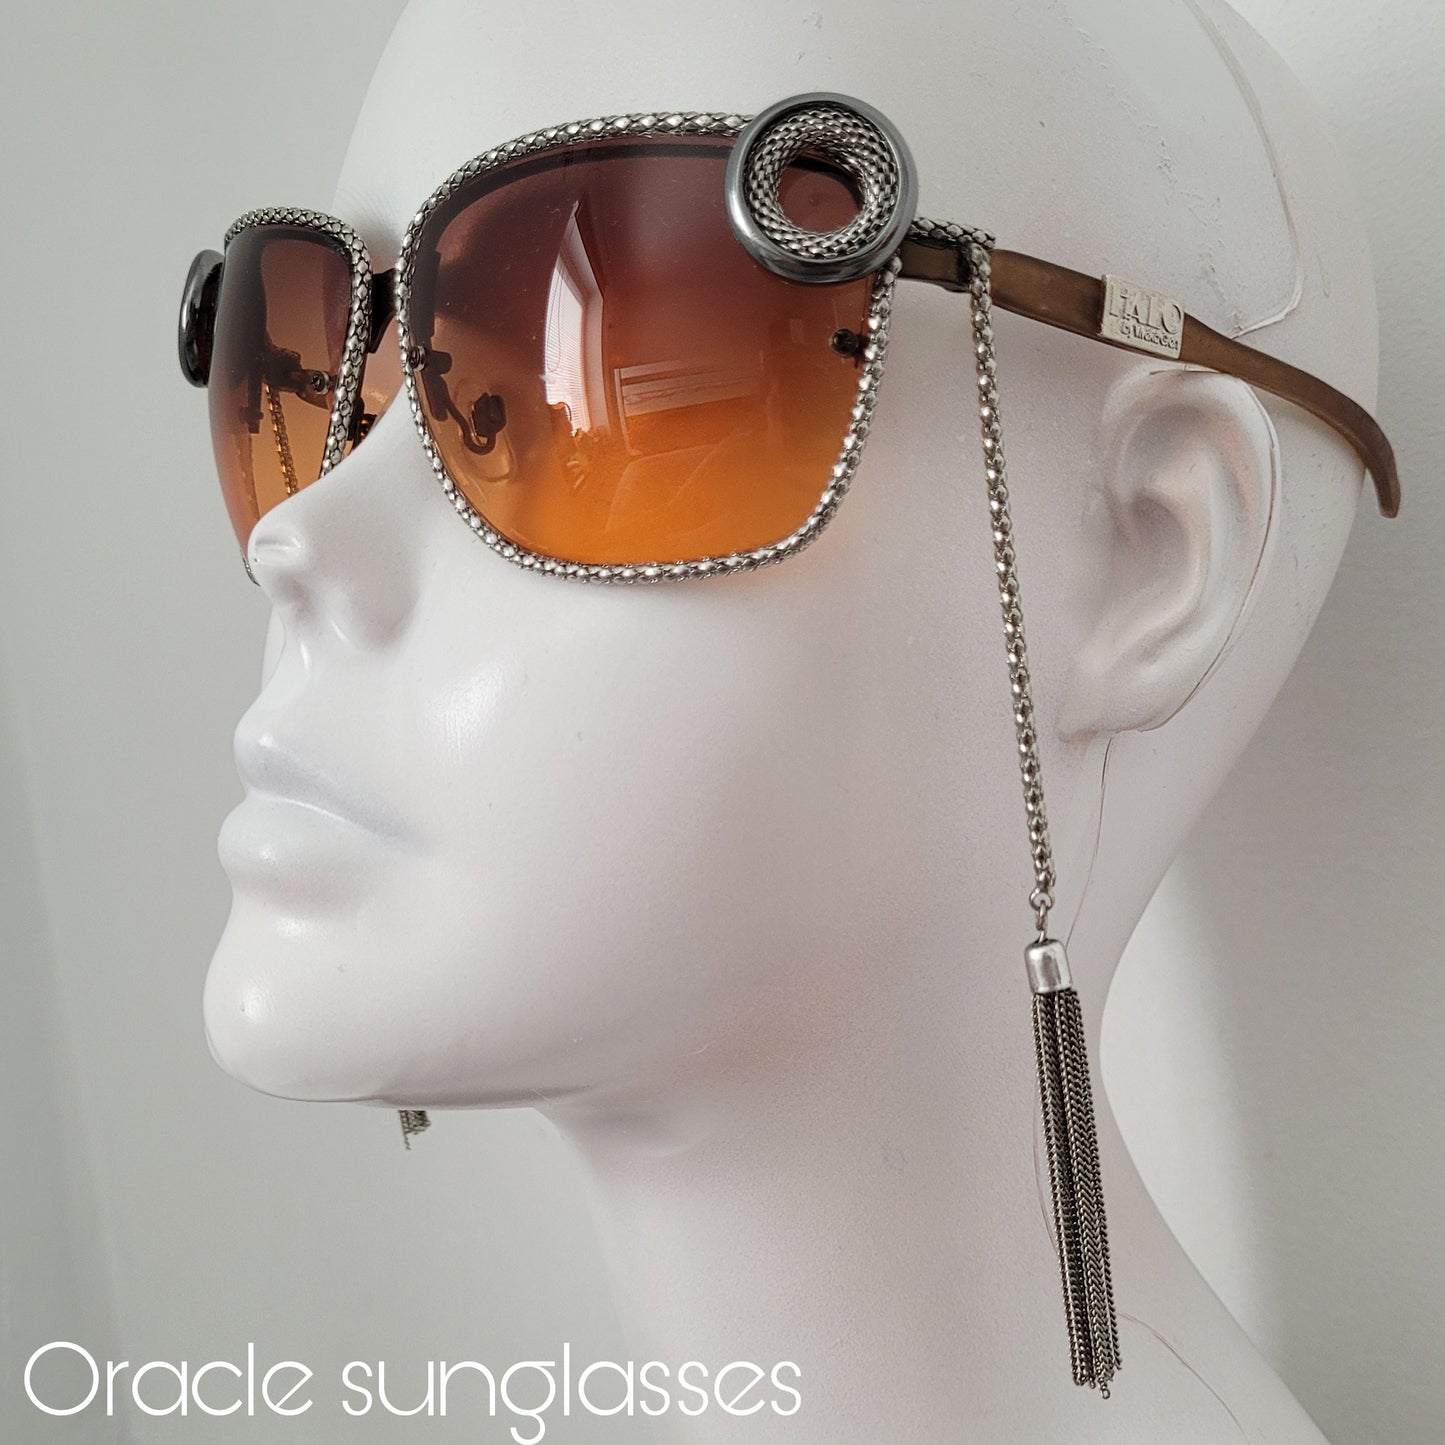 The Oracle Sunglasses